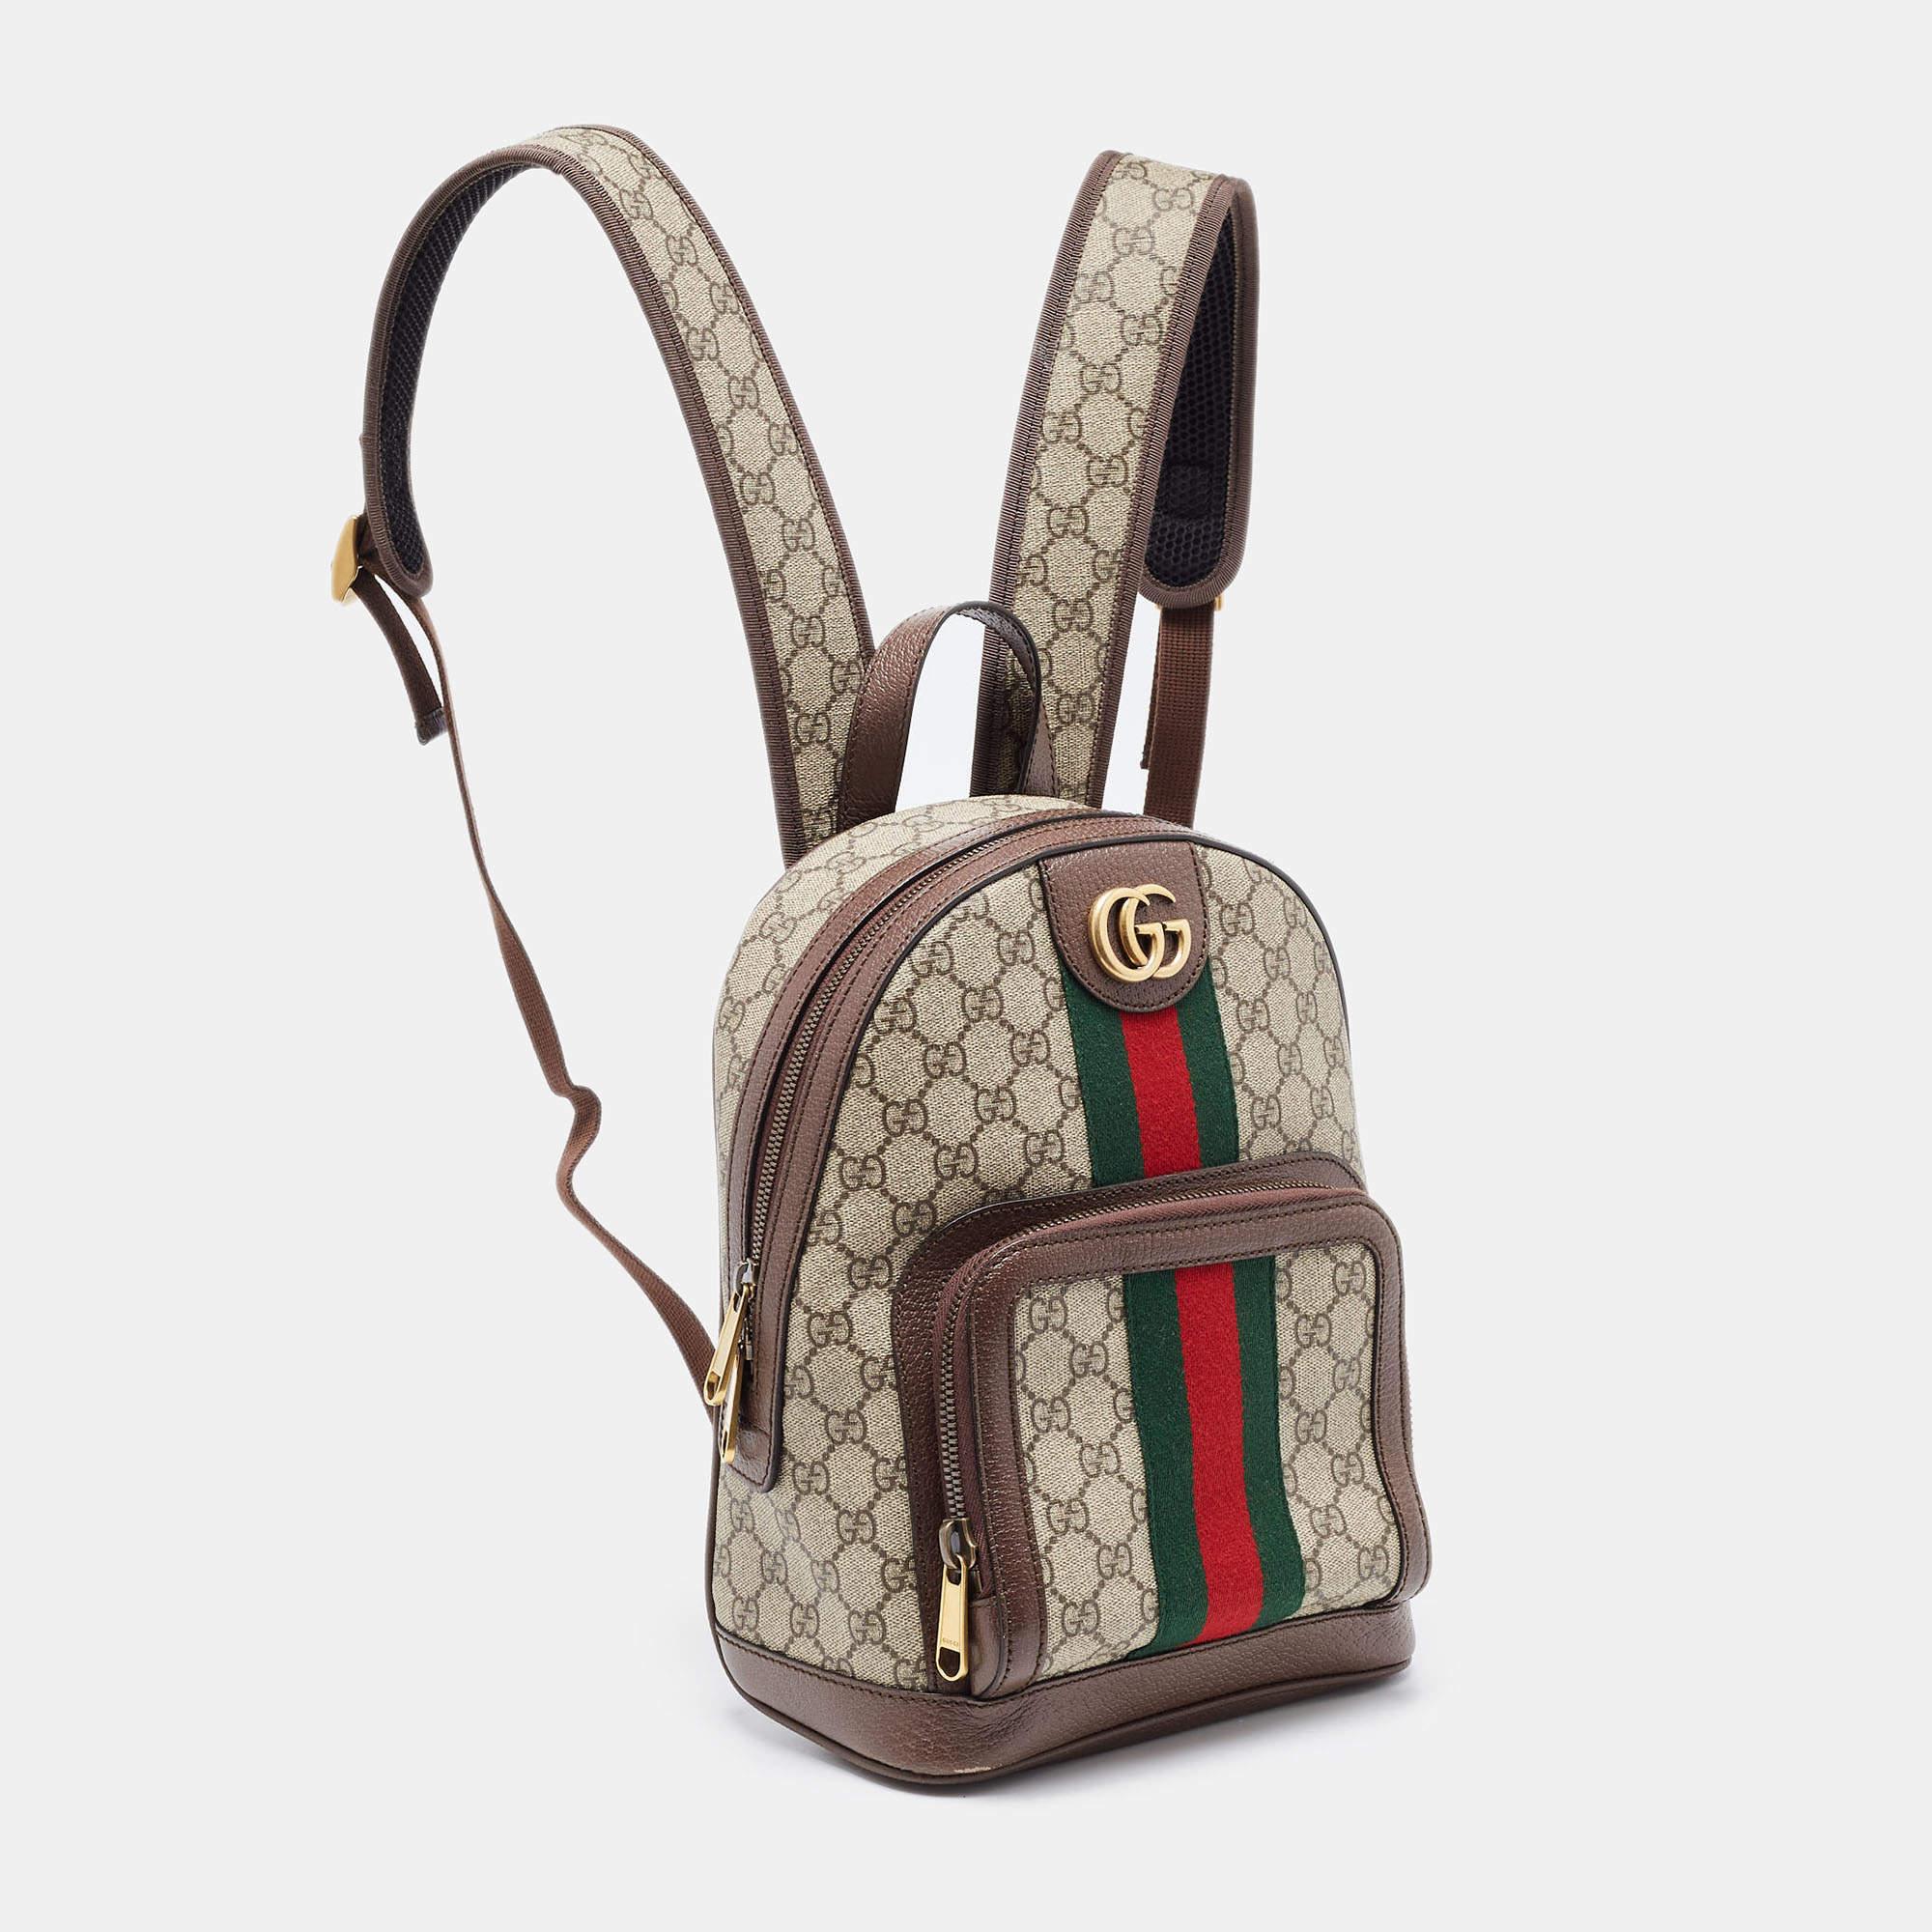 Add to your look by accessorising with this Gucci backpack. Designed expertly, this bag features a GG Supreme coated canvas body. The bag flaunts signature GG on the front along with the web detailing and a zipped pocket. It is held by shoulder